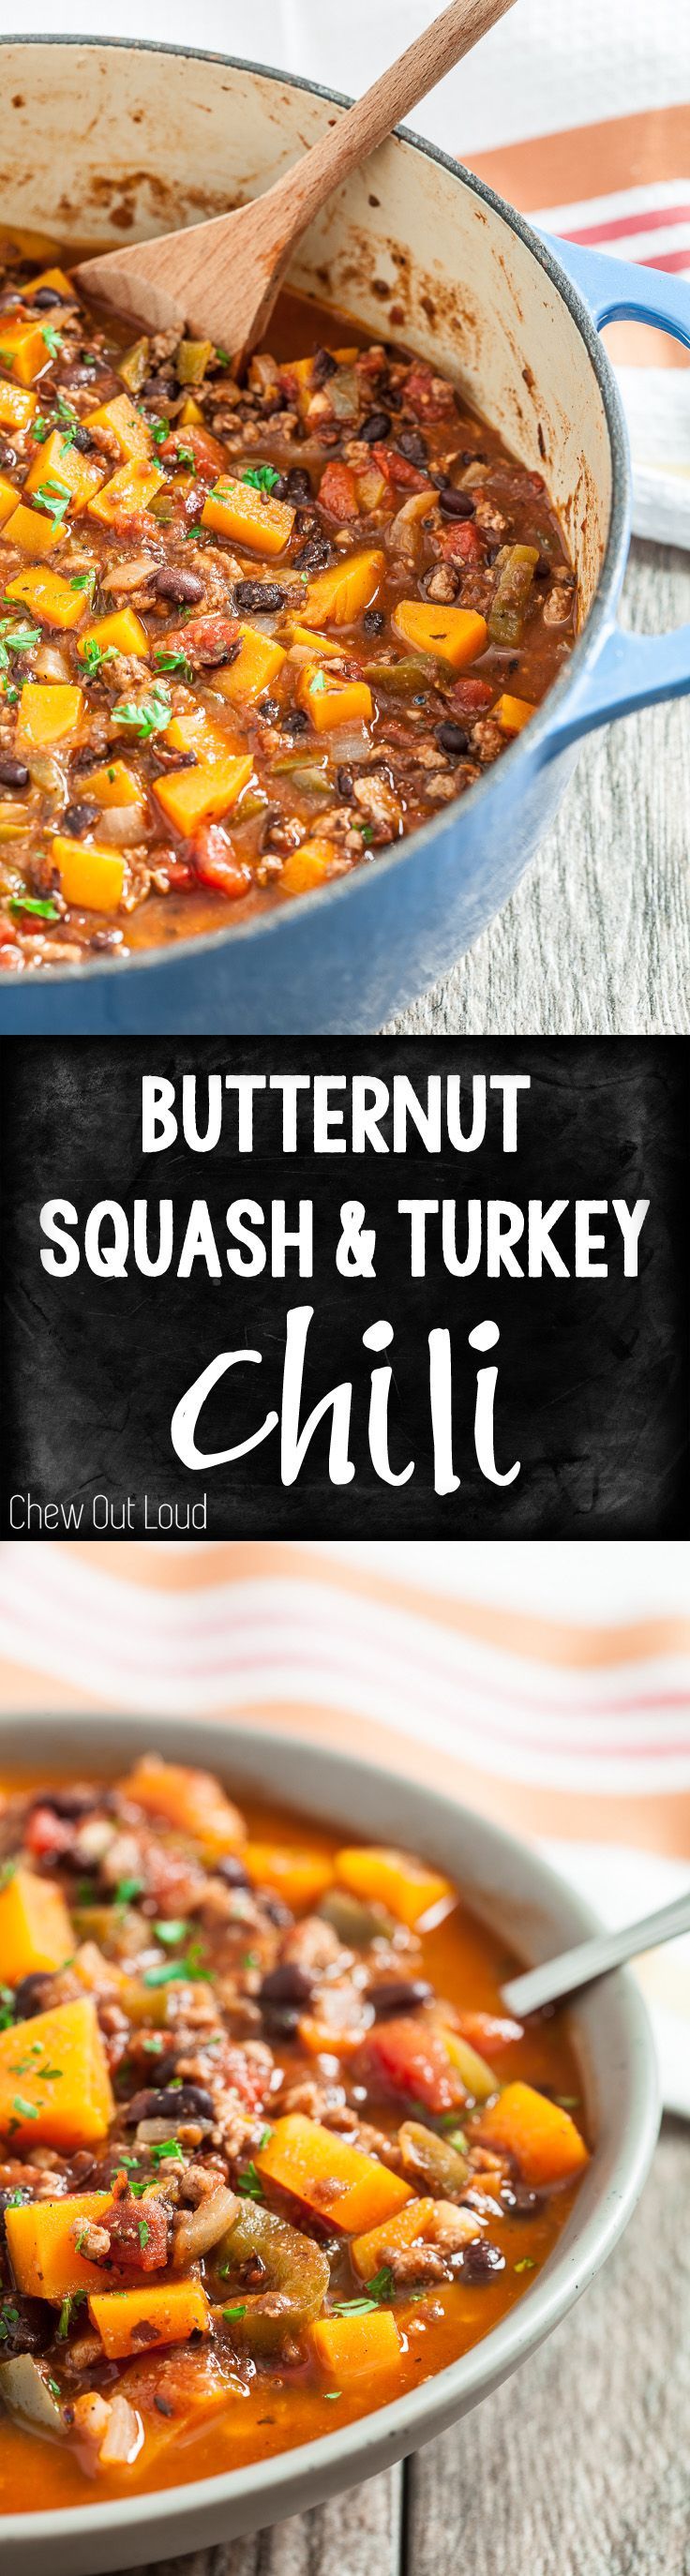 Hearty, healthy, and mouthwatering Butternut Squash & Turkey Chili. So flavorful and comforting. #chil